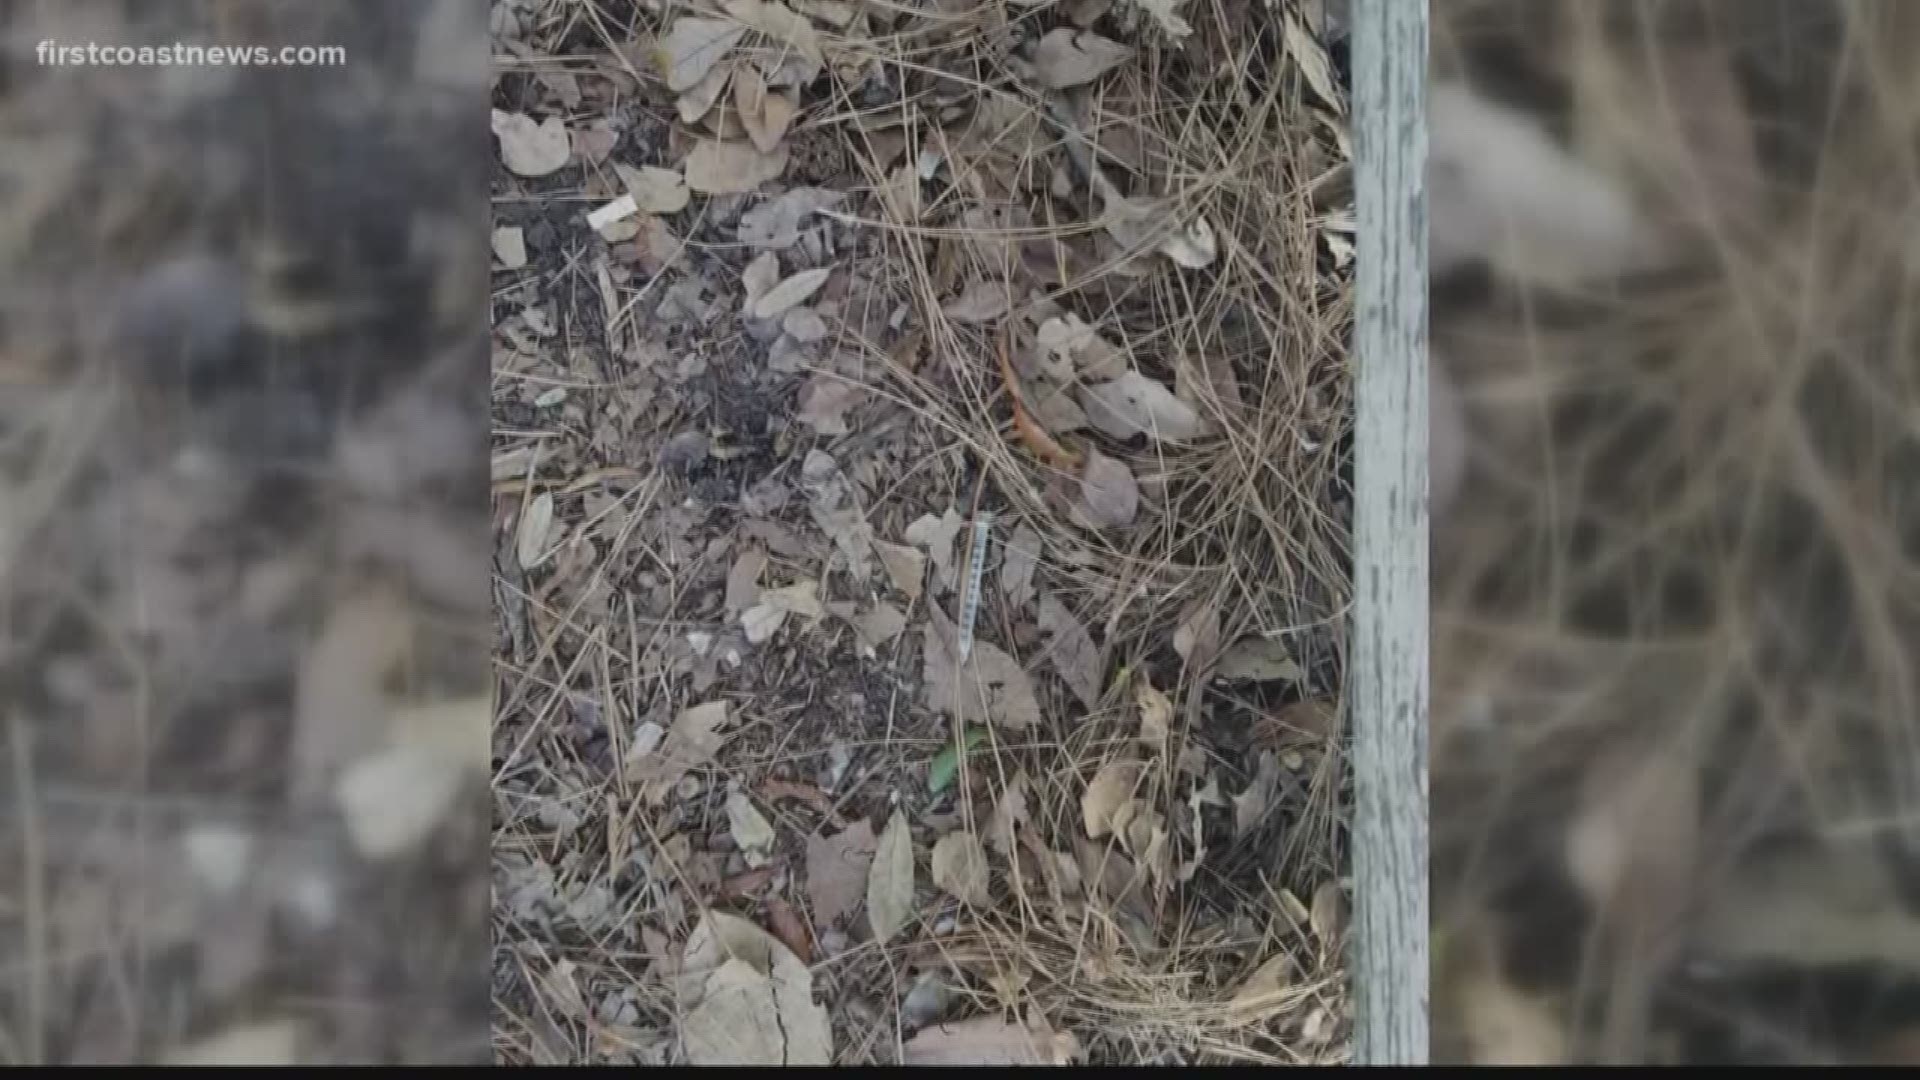 A local man said he found a heroin needle at Willow Branch Park. He and his friends are taking their own time to clean it up.